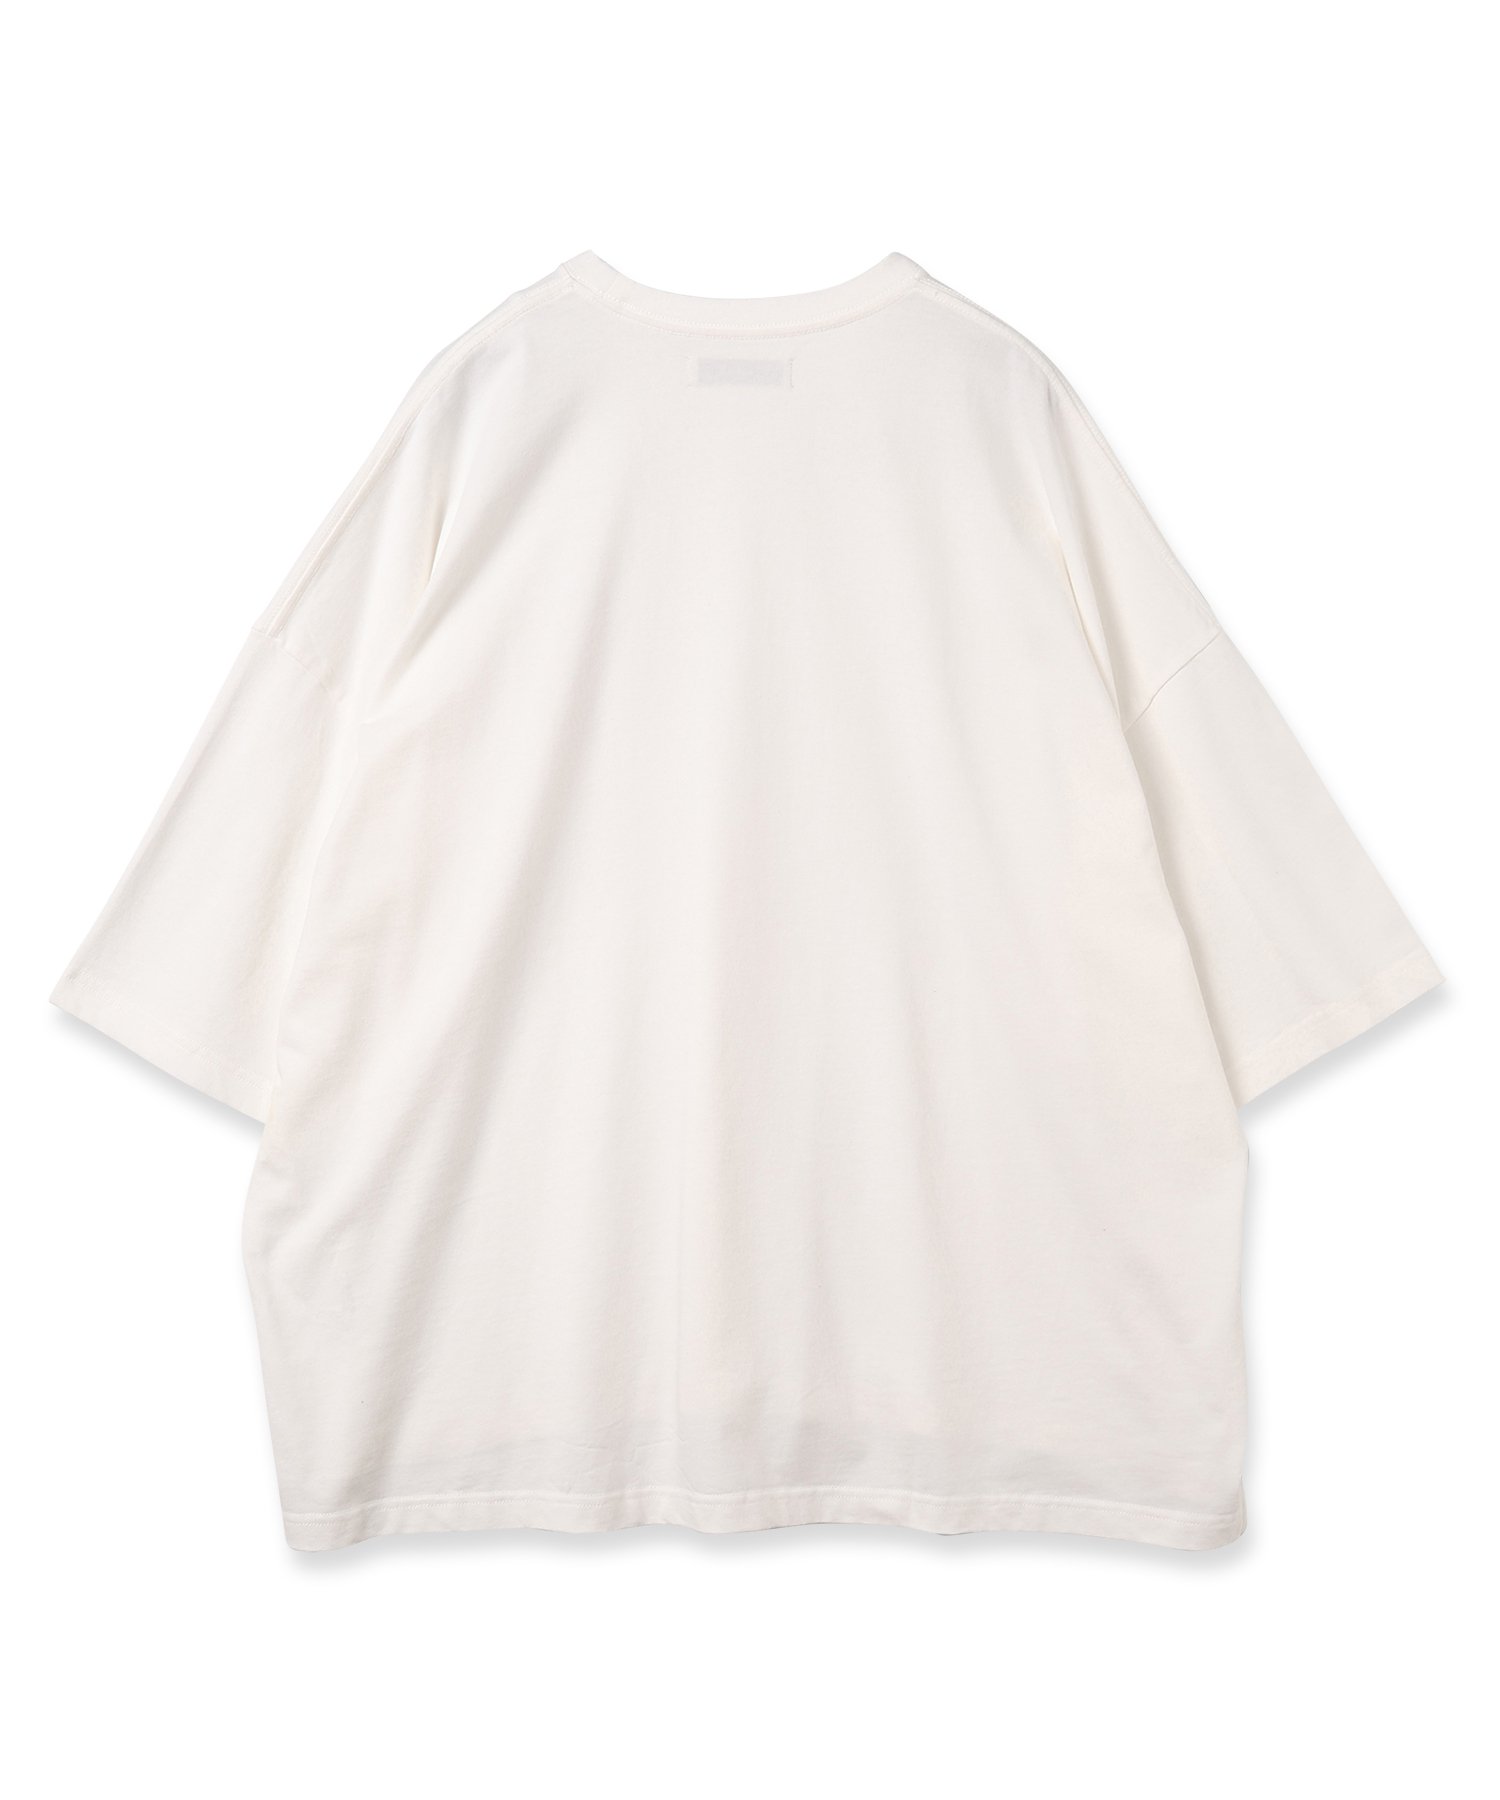 JieDa<br />JEI PRINT TEE / WHITE<img class='new_mark_img2' src='https://img.shop-pro.jp/img/new/icons47.gif' style='border:none;display:inline;margin:0px;padding:0px;width:auto;' />